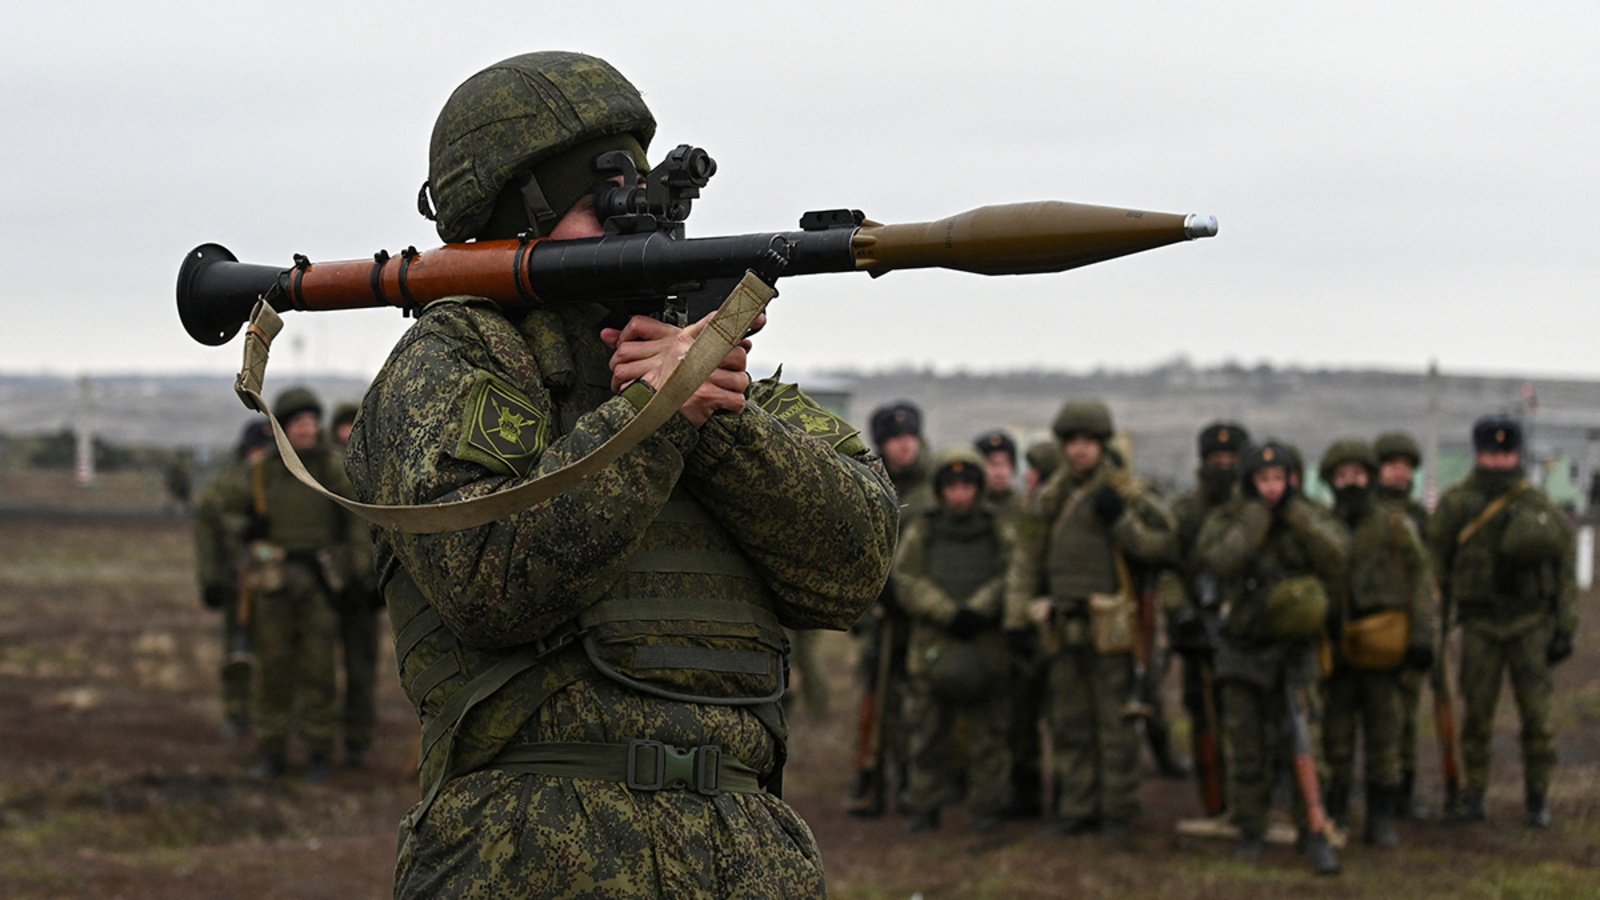 Russian armed forces participate in combat drills in the Rostov region, Russia